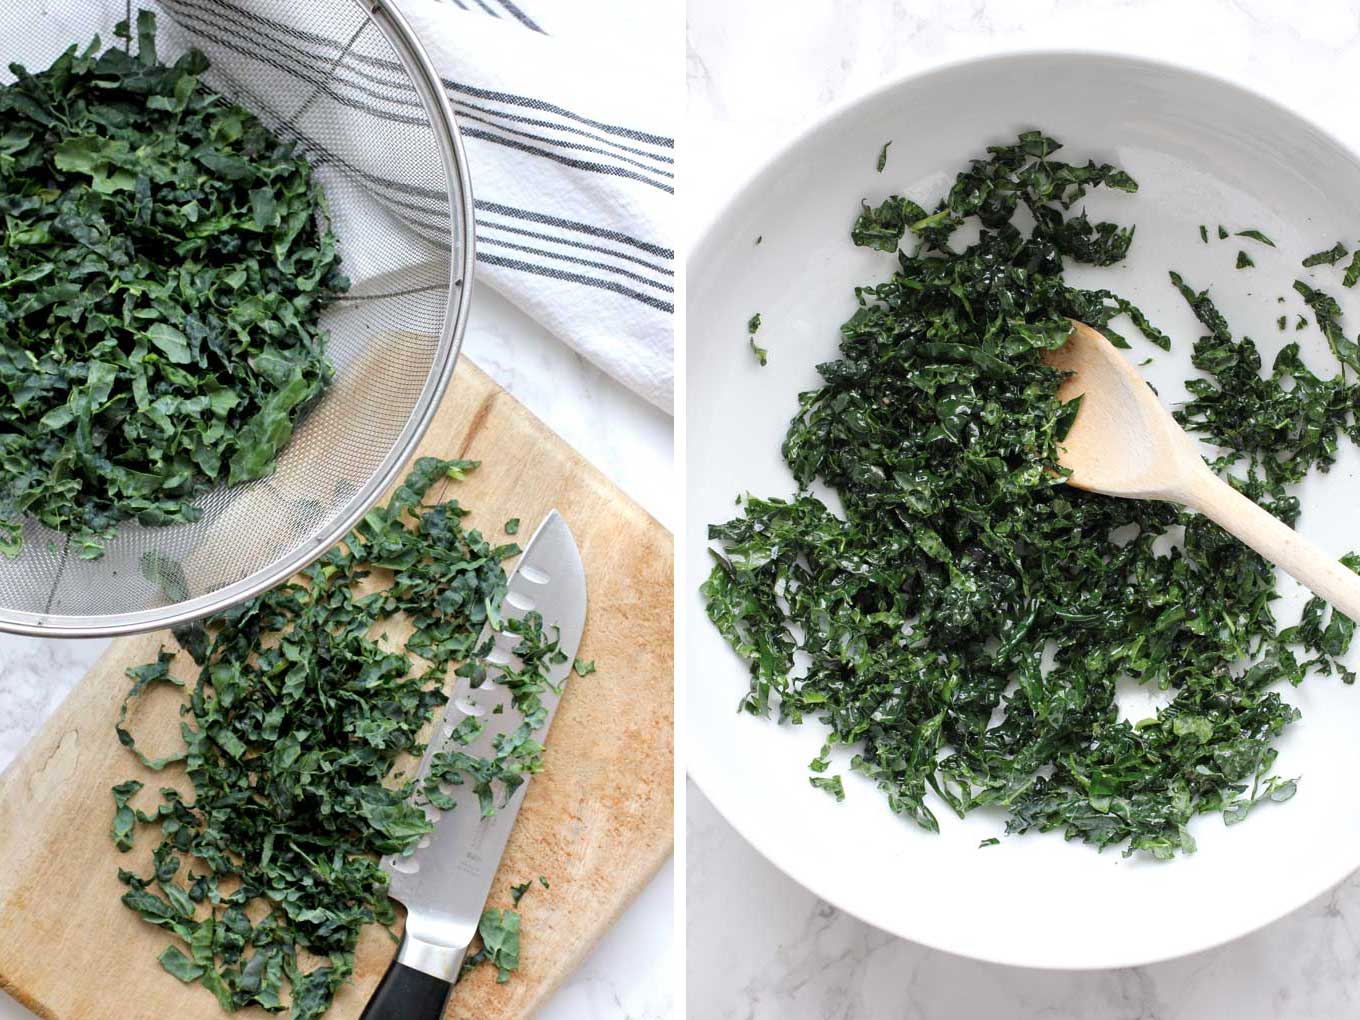 Side by side shot of kale being chopped and kale tossed in white bowl.